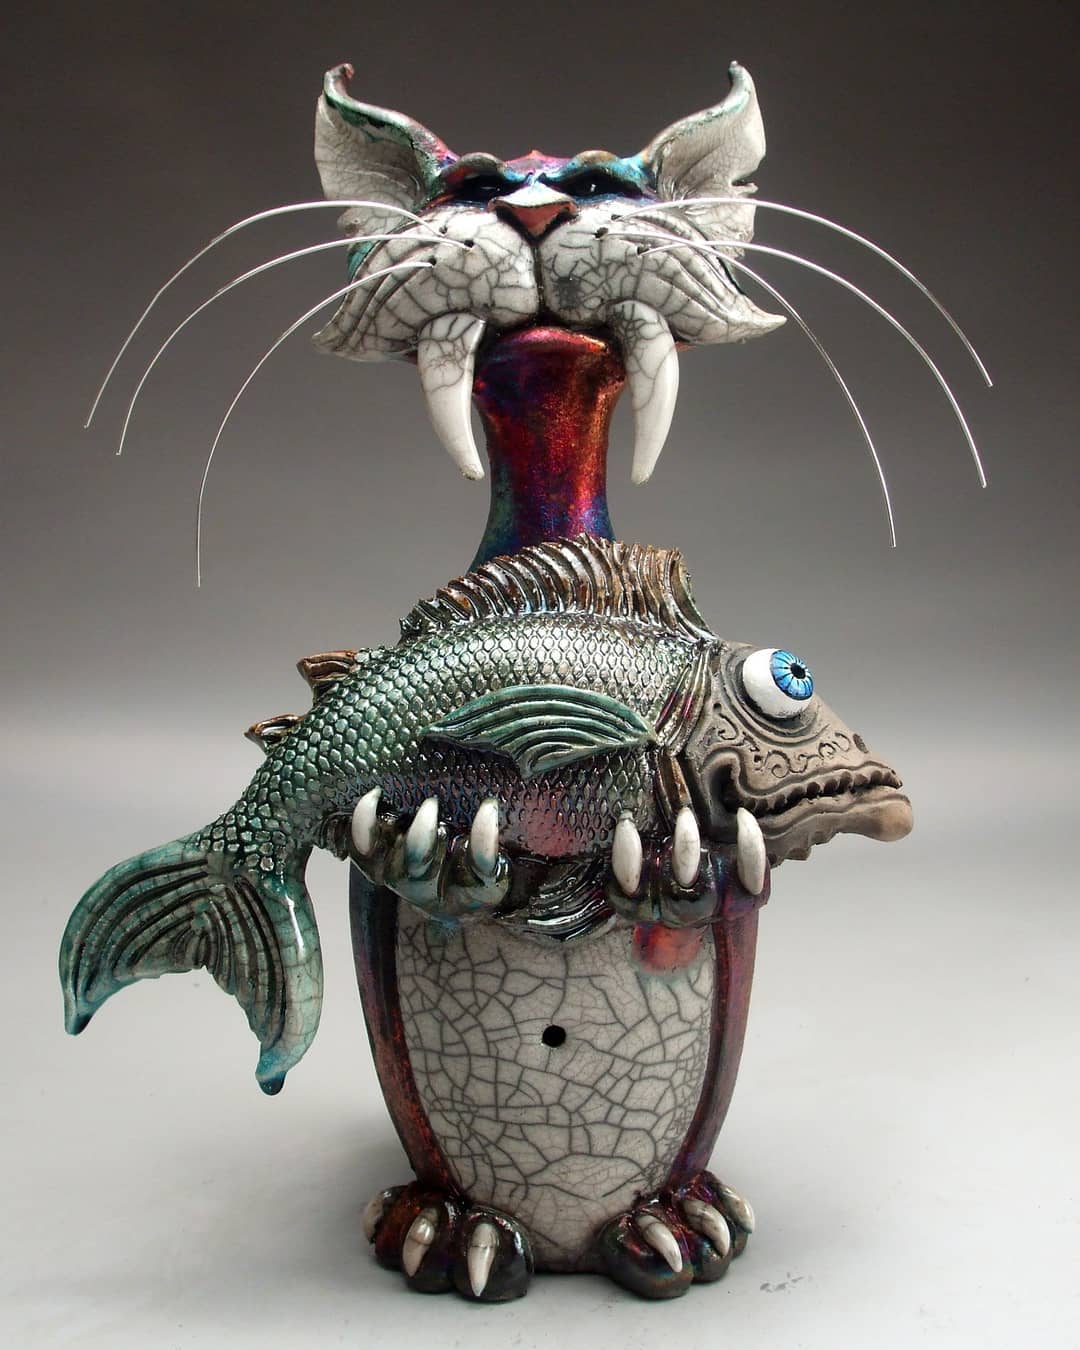 Ceramic Fairytales, Intricate Sculptures, Teapots, And Mugs By Mitchell Grafton (2)